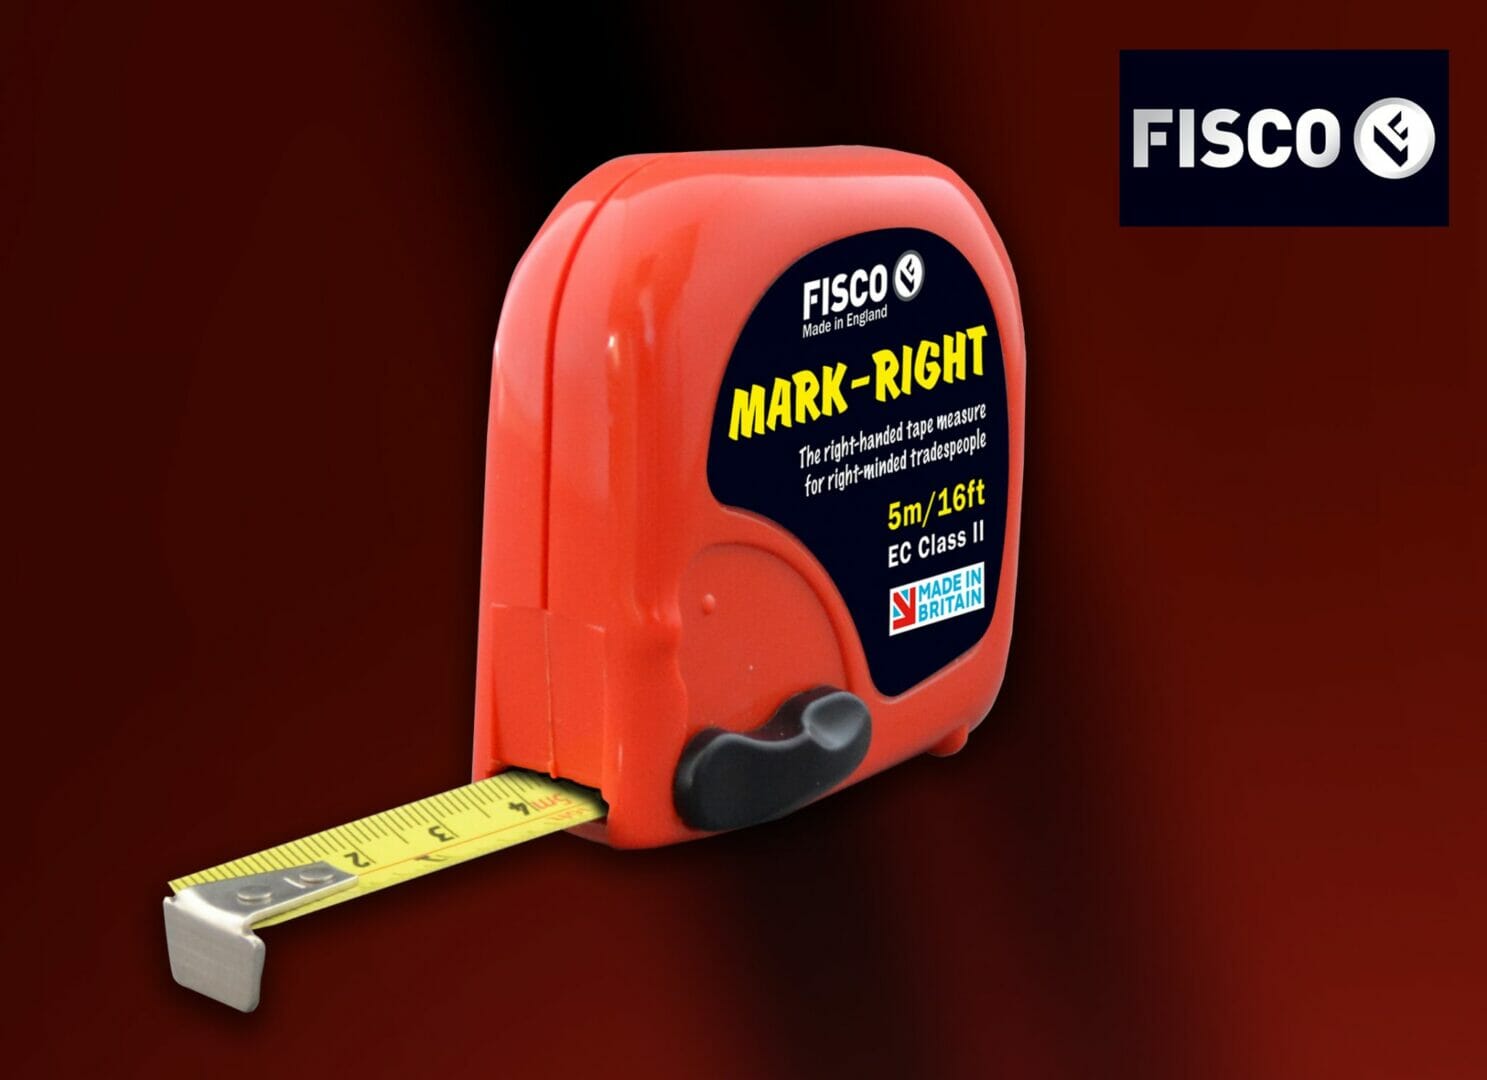 Fisco’s New ‘Mark-Right’ – The ‘Time-Saving’ Tape for Right-Handed Craftsmen. @SnickersWw_UK